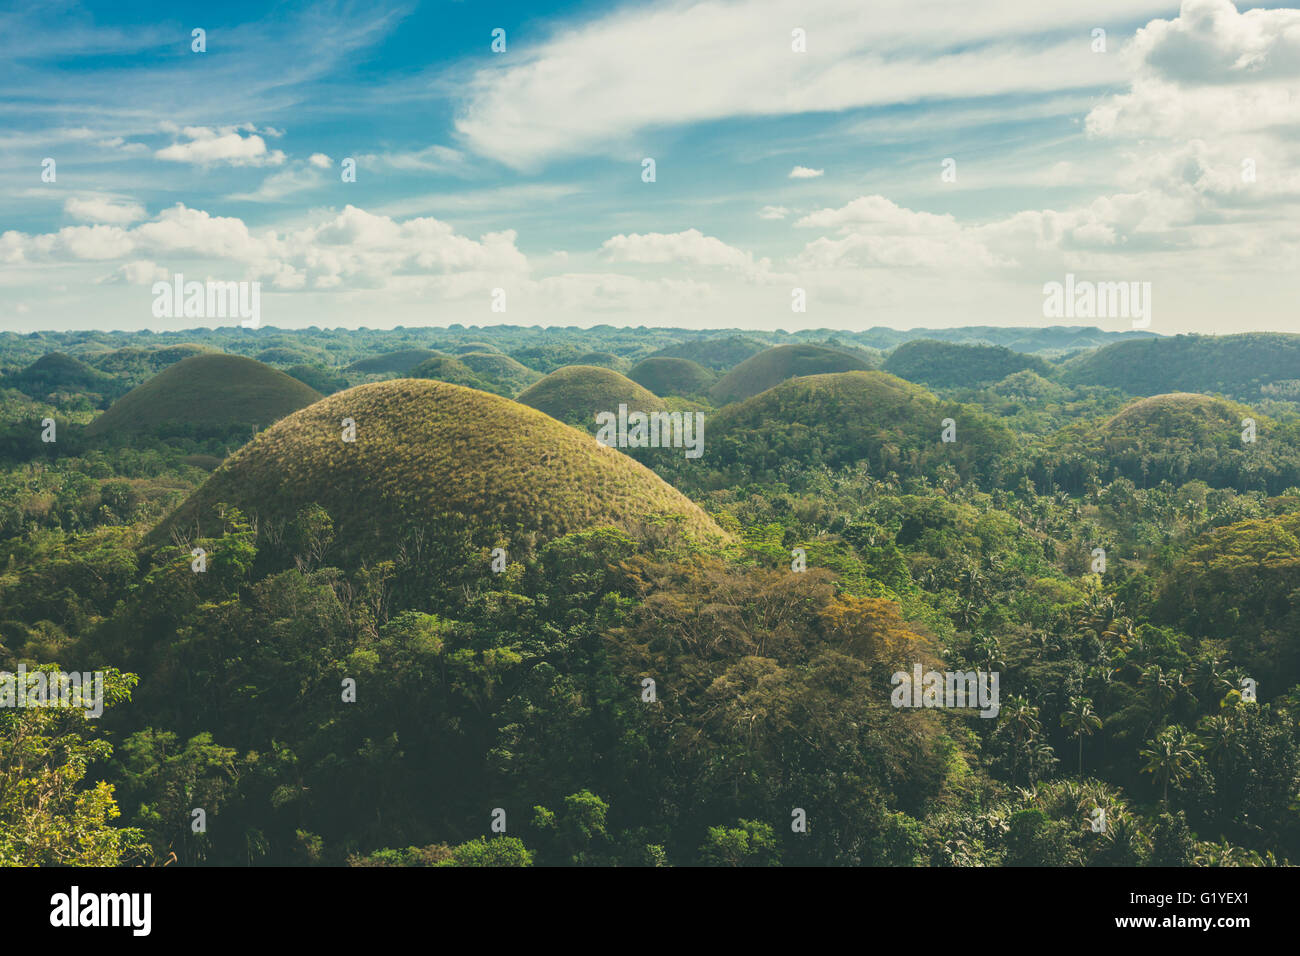 View of the famous and unusual Chocolate Hills in Bohol, Philippines Stock Photo